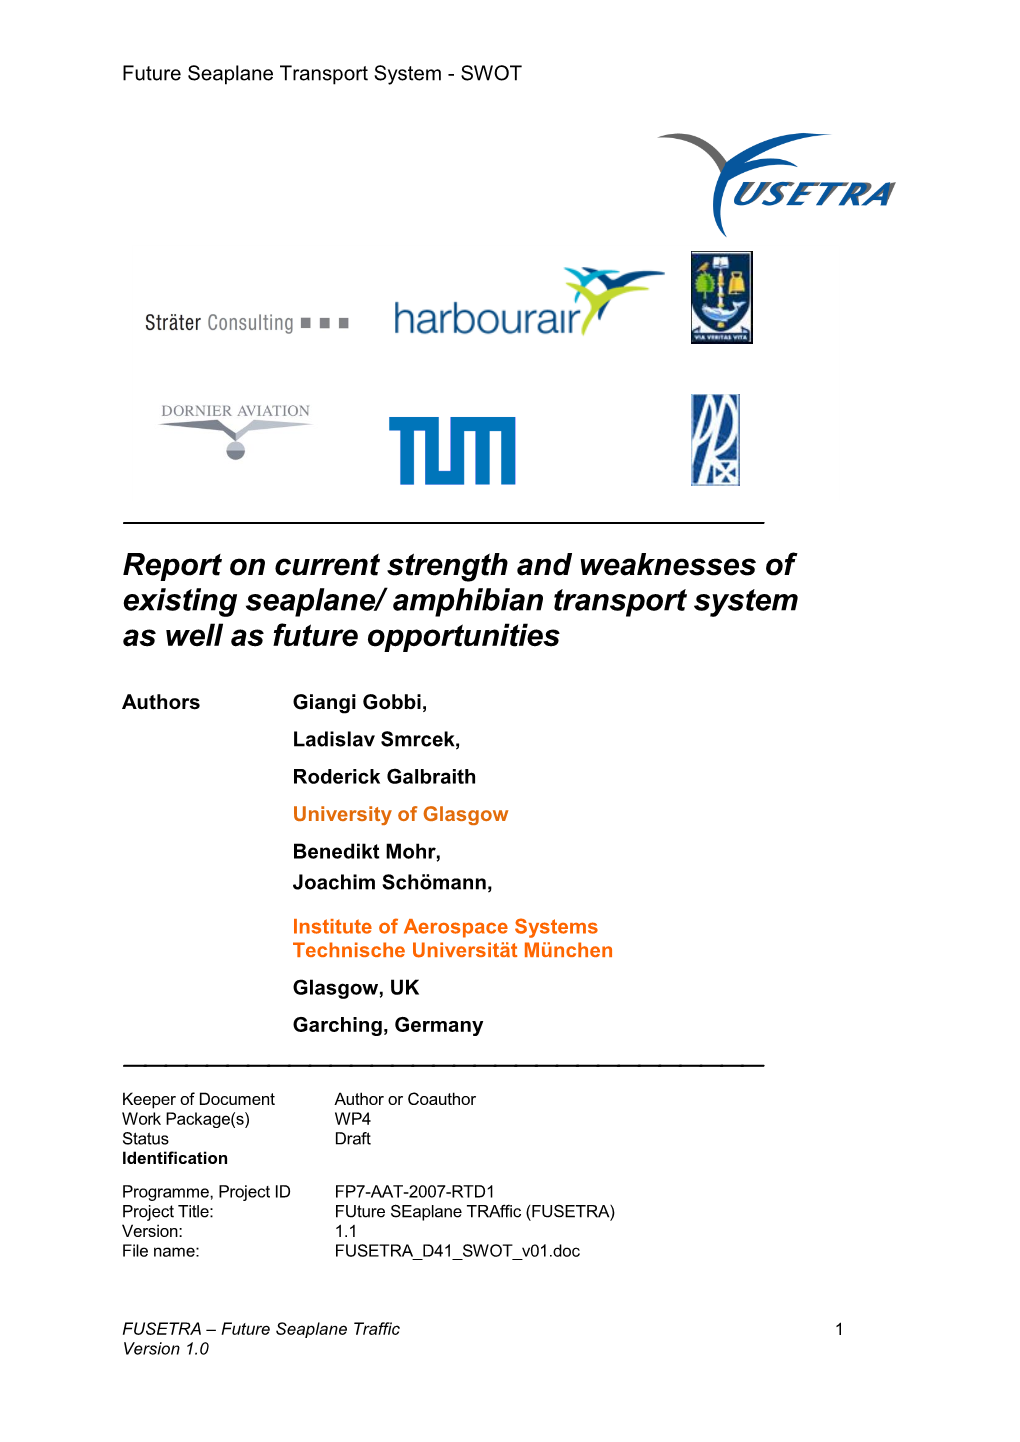 Report on Current Strength and Weaknesses of Existing Seaplane/ Amphibian Transport System As Well As Future Opportunities